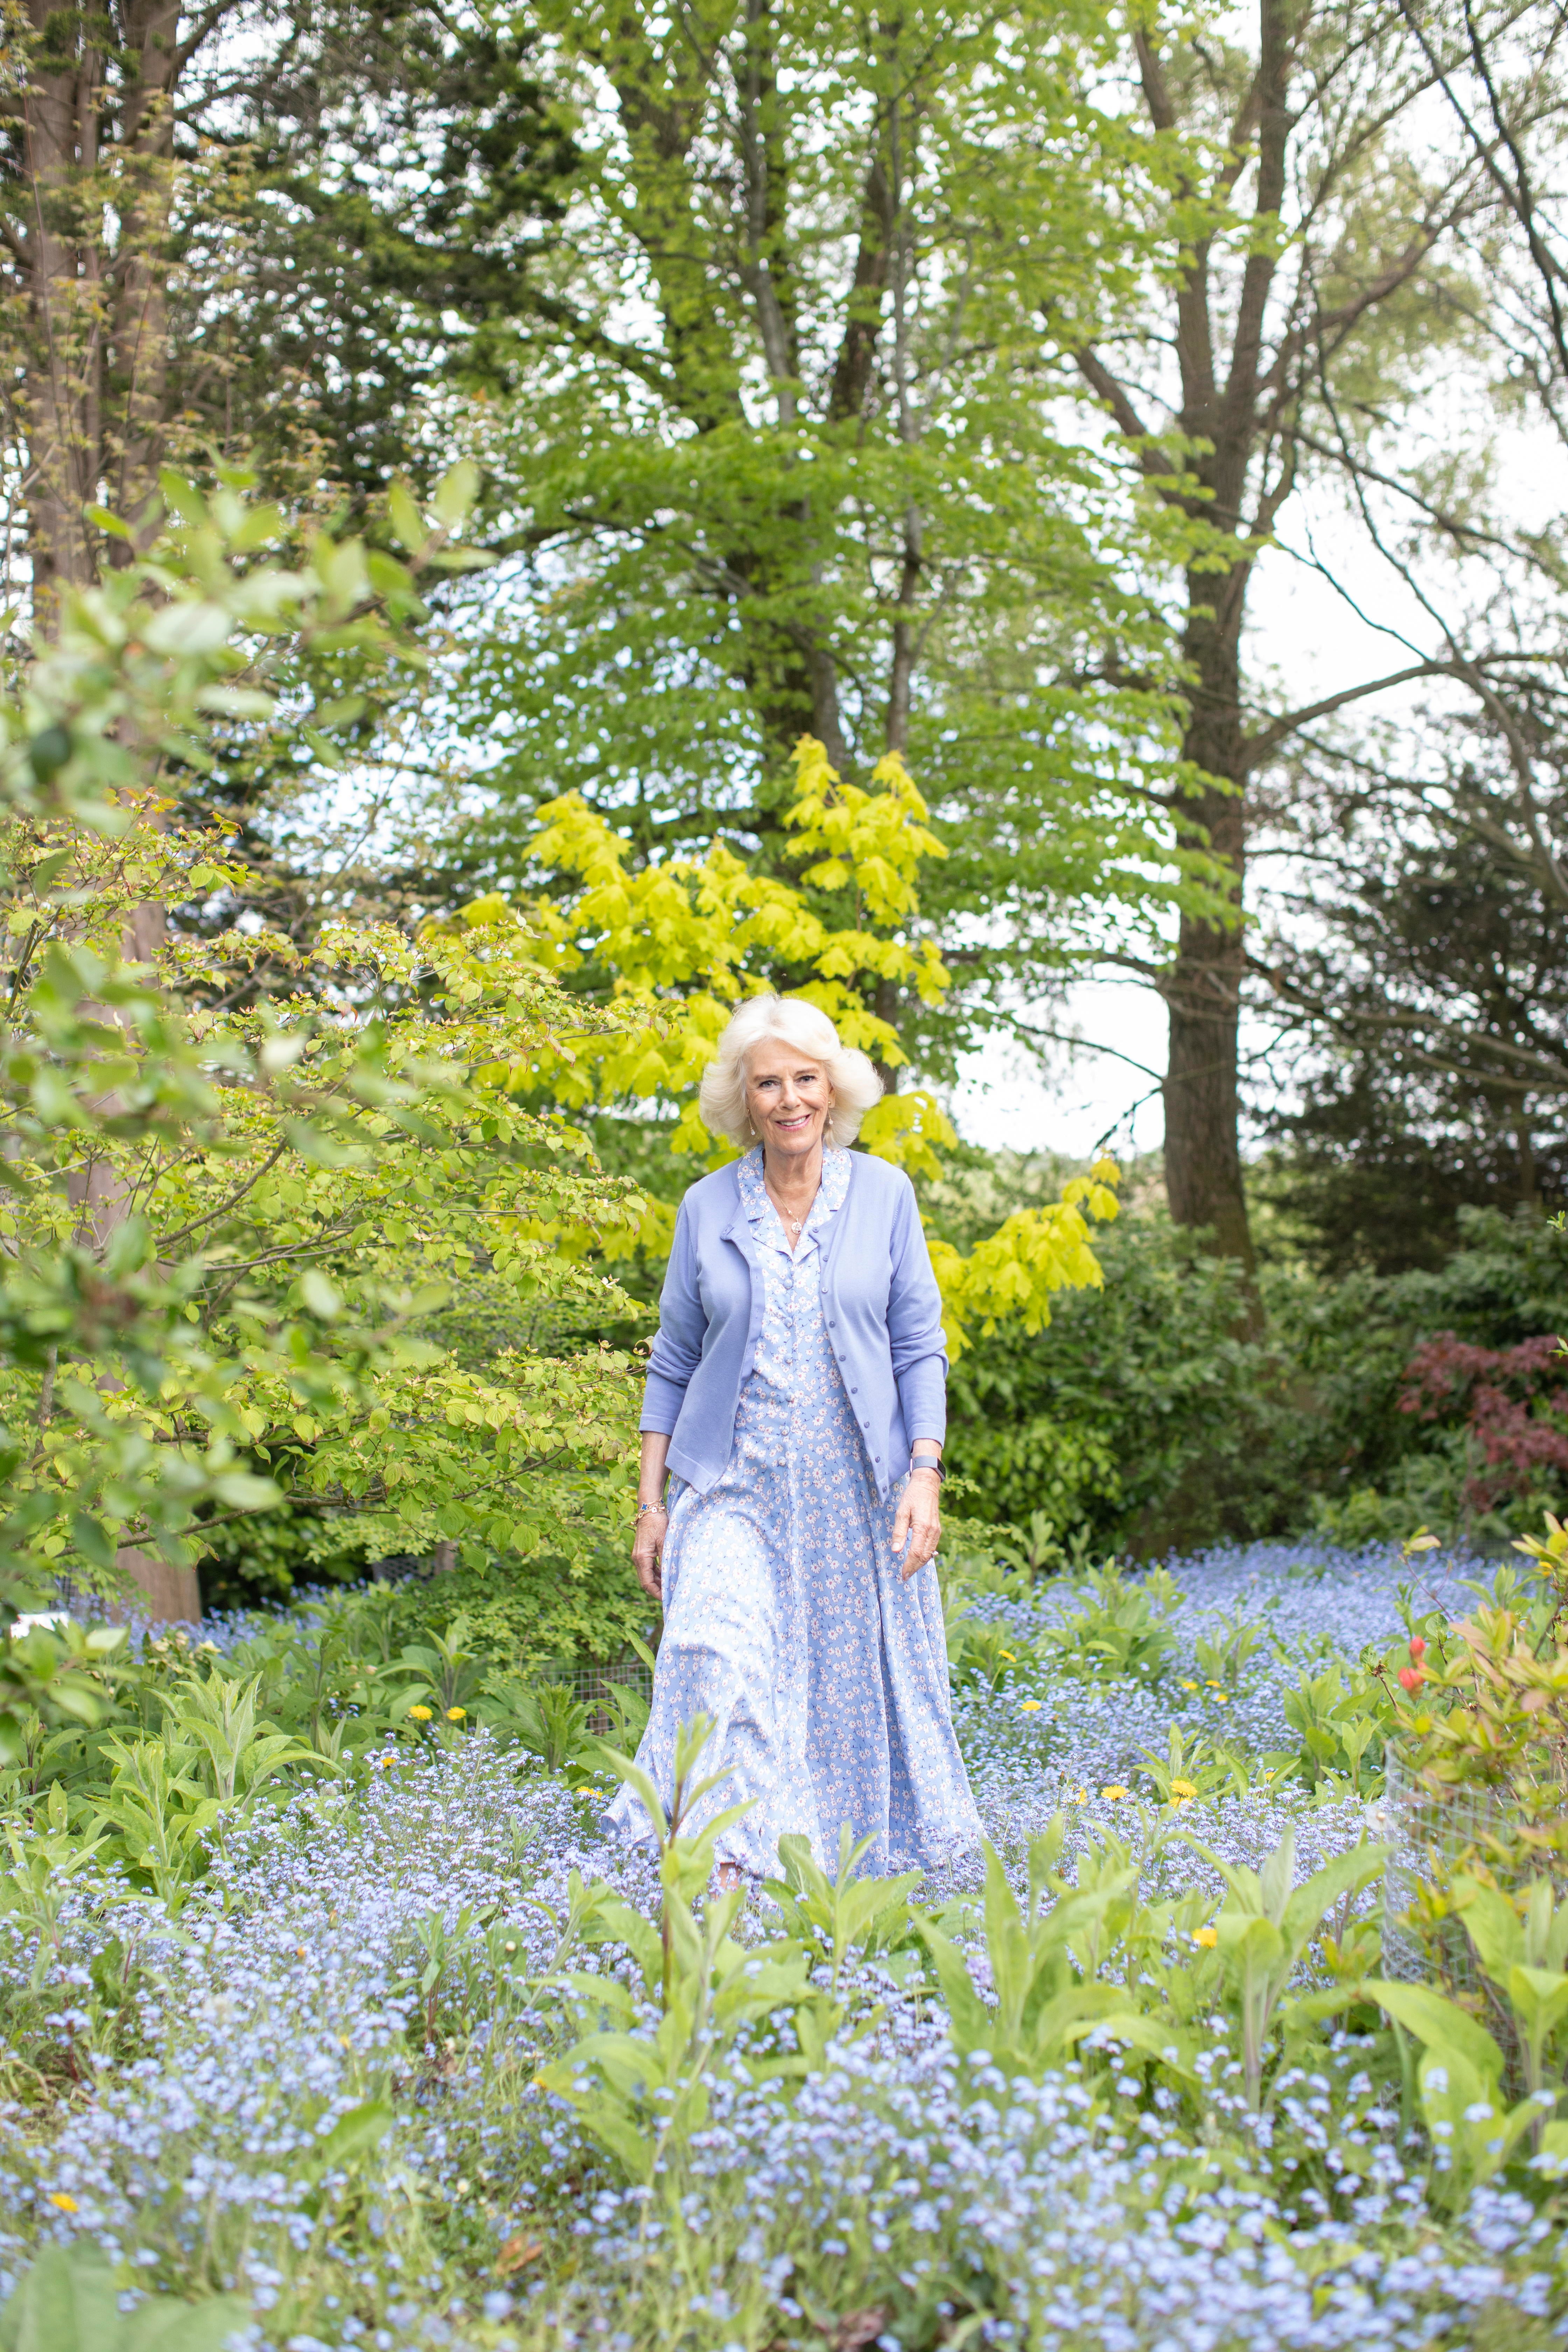 The Duchess of Cornwall photographed at Raymill in Wiltshire by the Duchess of Cambridge (HRH The Duchess of Cambridge/PA)